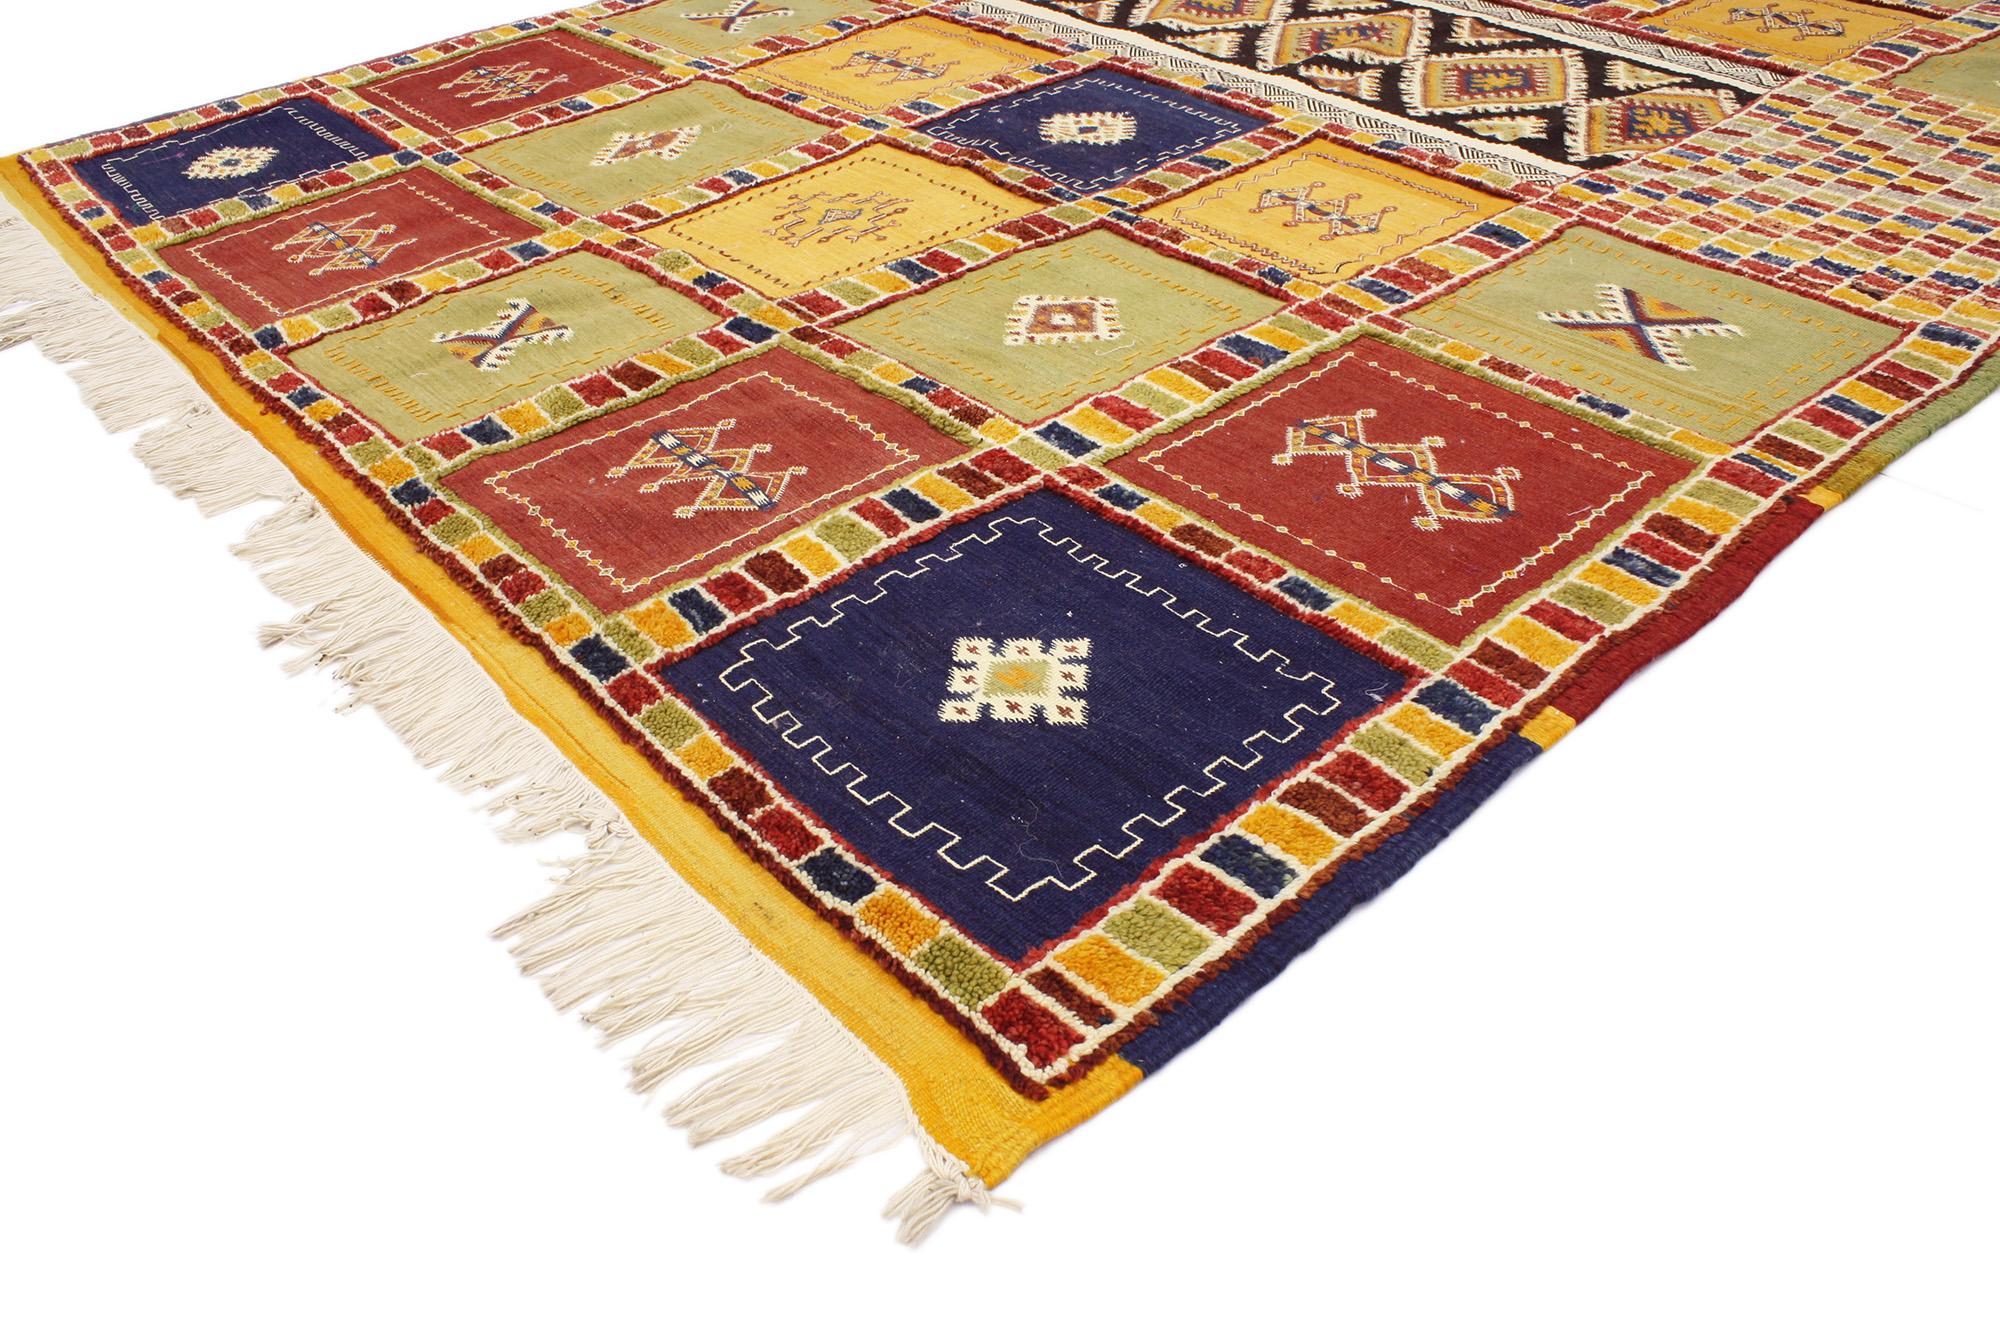 20351 Vintage Taznakht Moroccan Kilim Rug, 07'01 x 10'01. A vintage Taznakht rug, originating from the Taznakht region in the High Atlas Mountains of Morocco, is renowned for its vibrant colors, intricate geometric patterns, and cultural